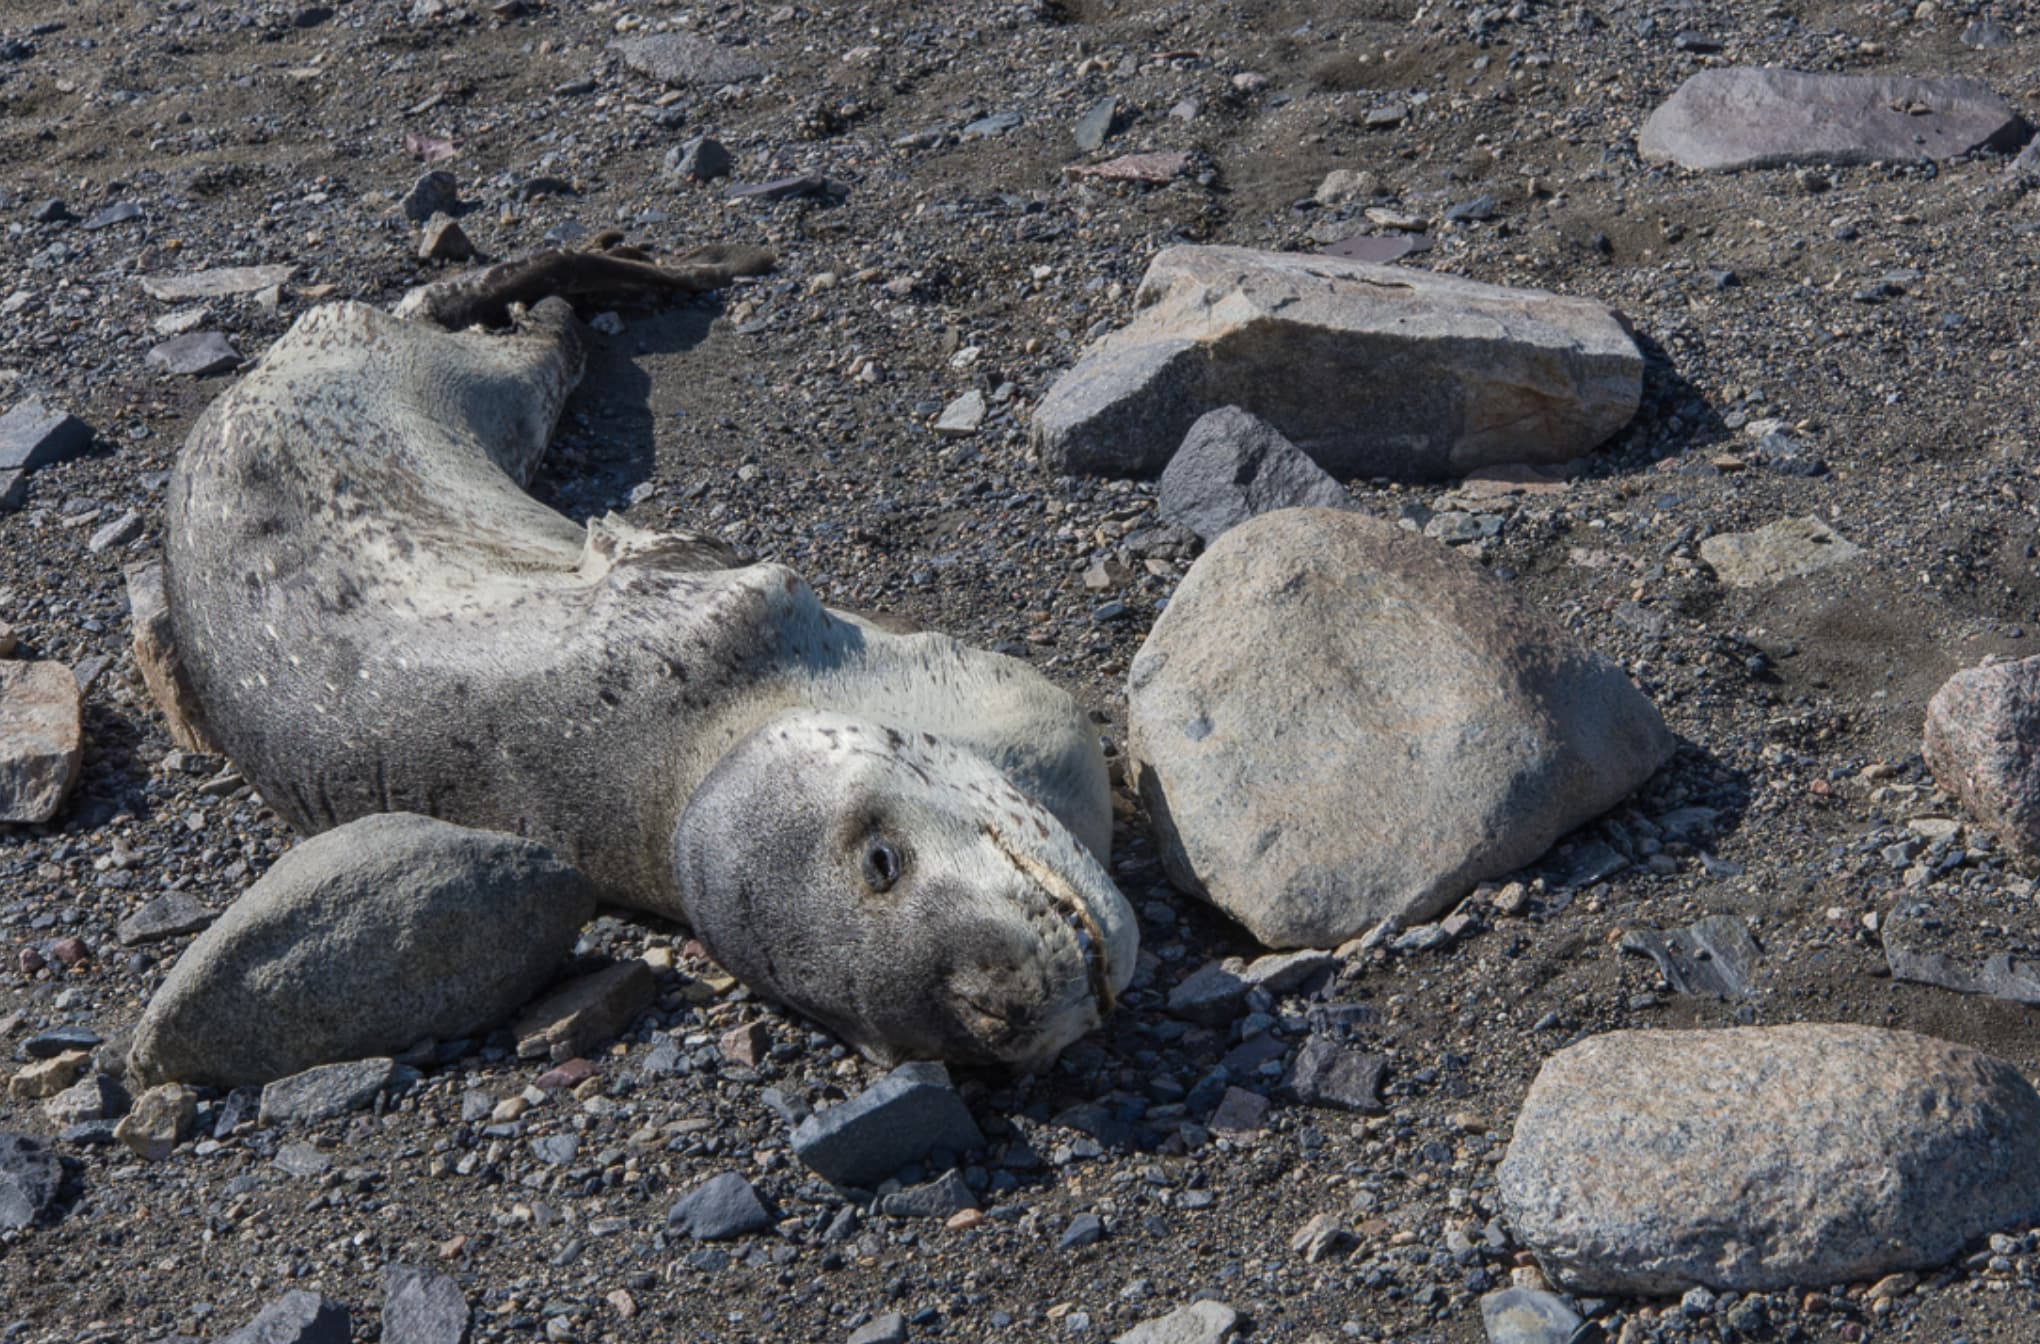 “Hundreds of mummified seals have been found as far as 41 miles inland in Antarctica. One tested specimen had been sitting out in the open for 1,500 years. Researchers theorize that 1-2 seals annually get lost during white-out events and accidentally travel inland, where they eventually die.”